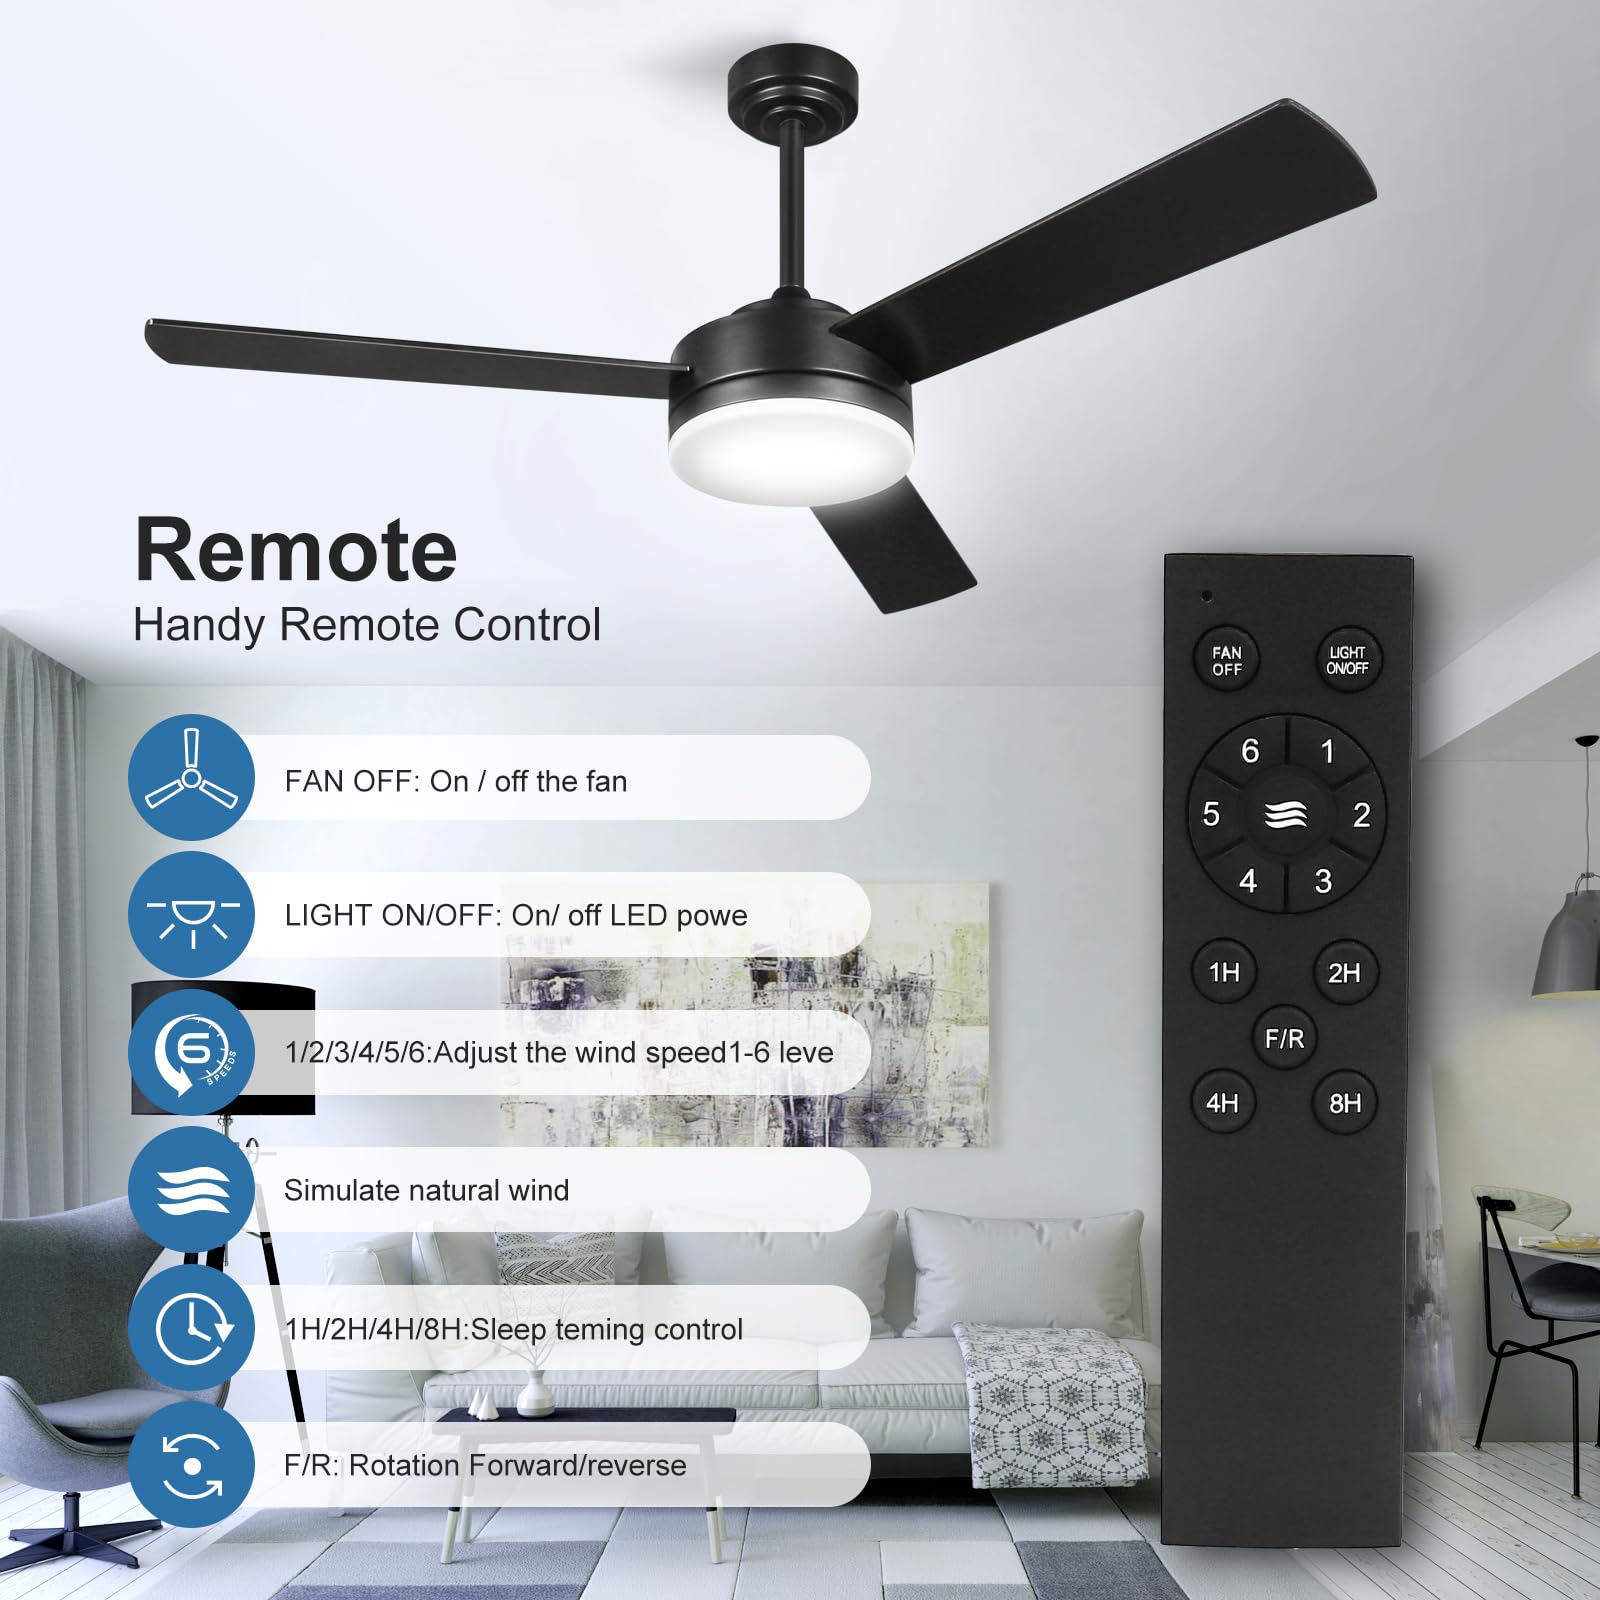 nkorka Black Ceiling Fans with Lights and Remote, Modern Ceiling Fan, Indoor Outdoor Ceiling Fans with Lights, 20W 3-Color LED Light, Noiseless Reversible DC Motor (52)